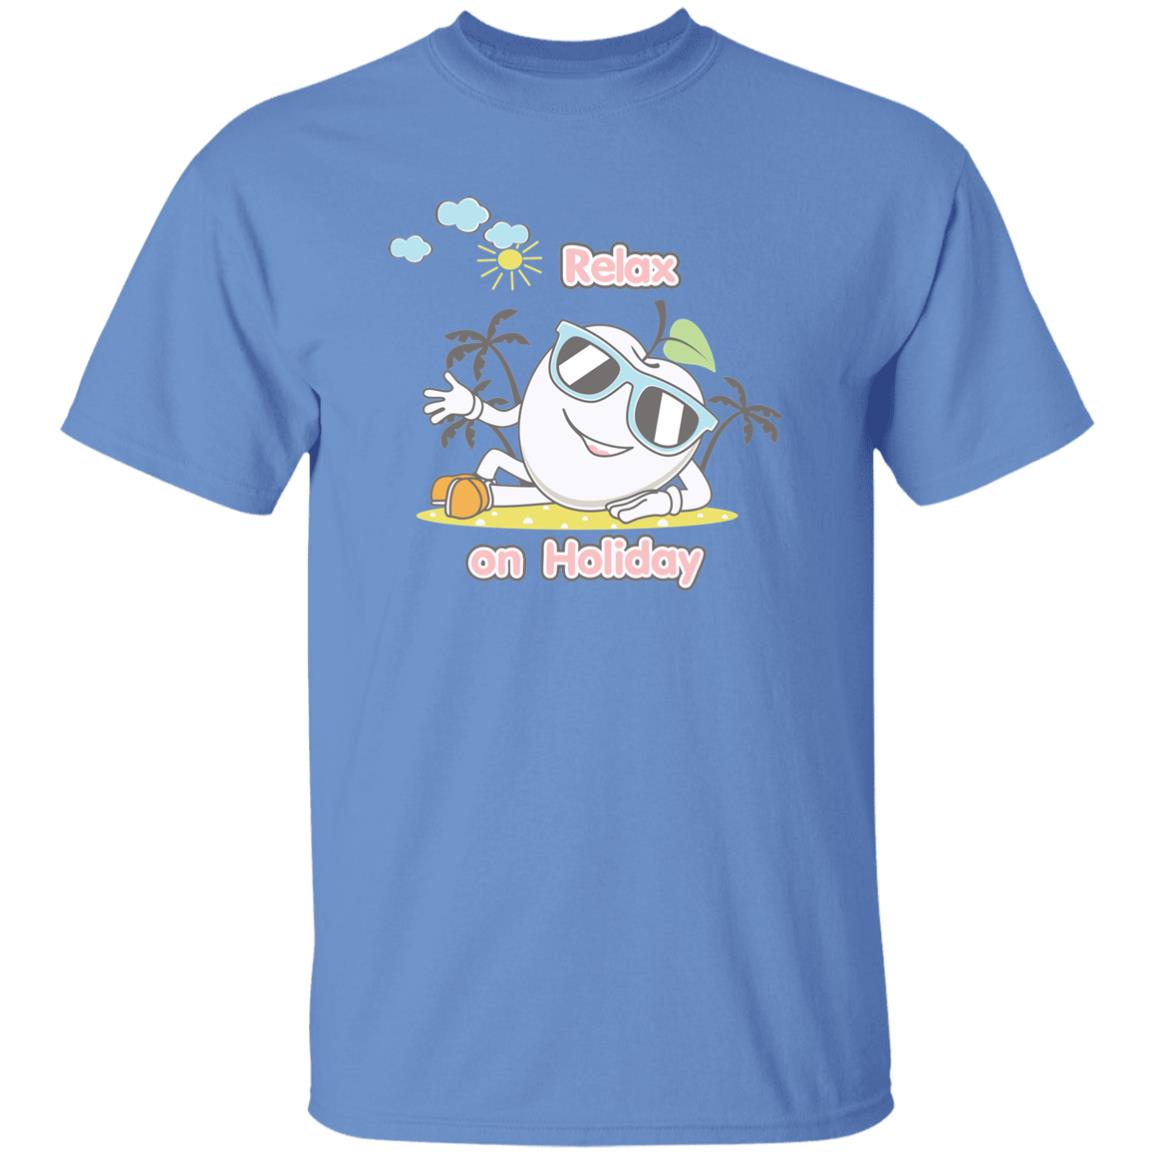 Relax on Holiday | Short Sleeve T-shirt | 100% Cotton